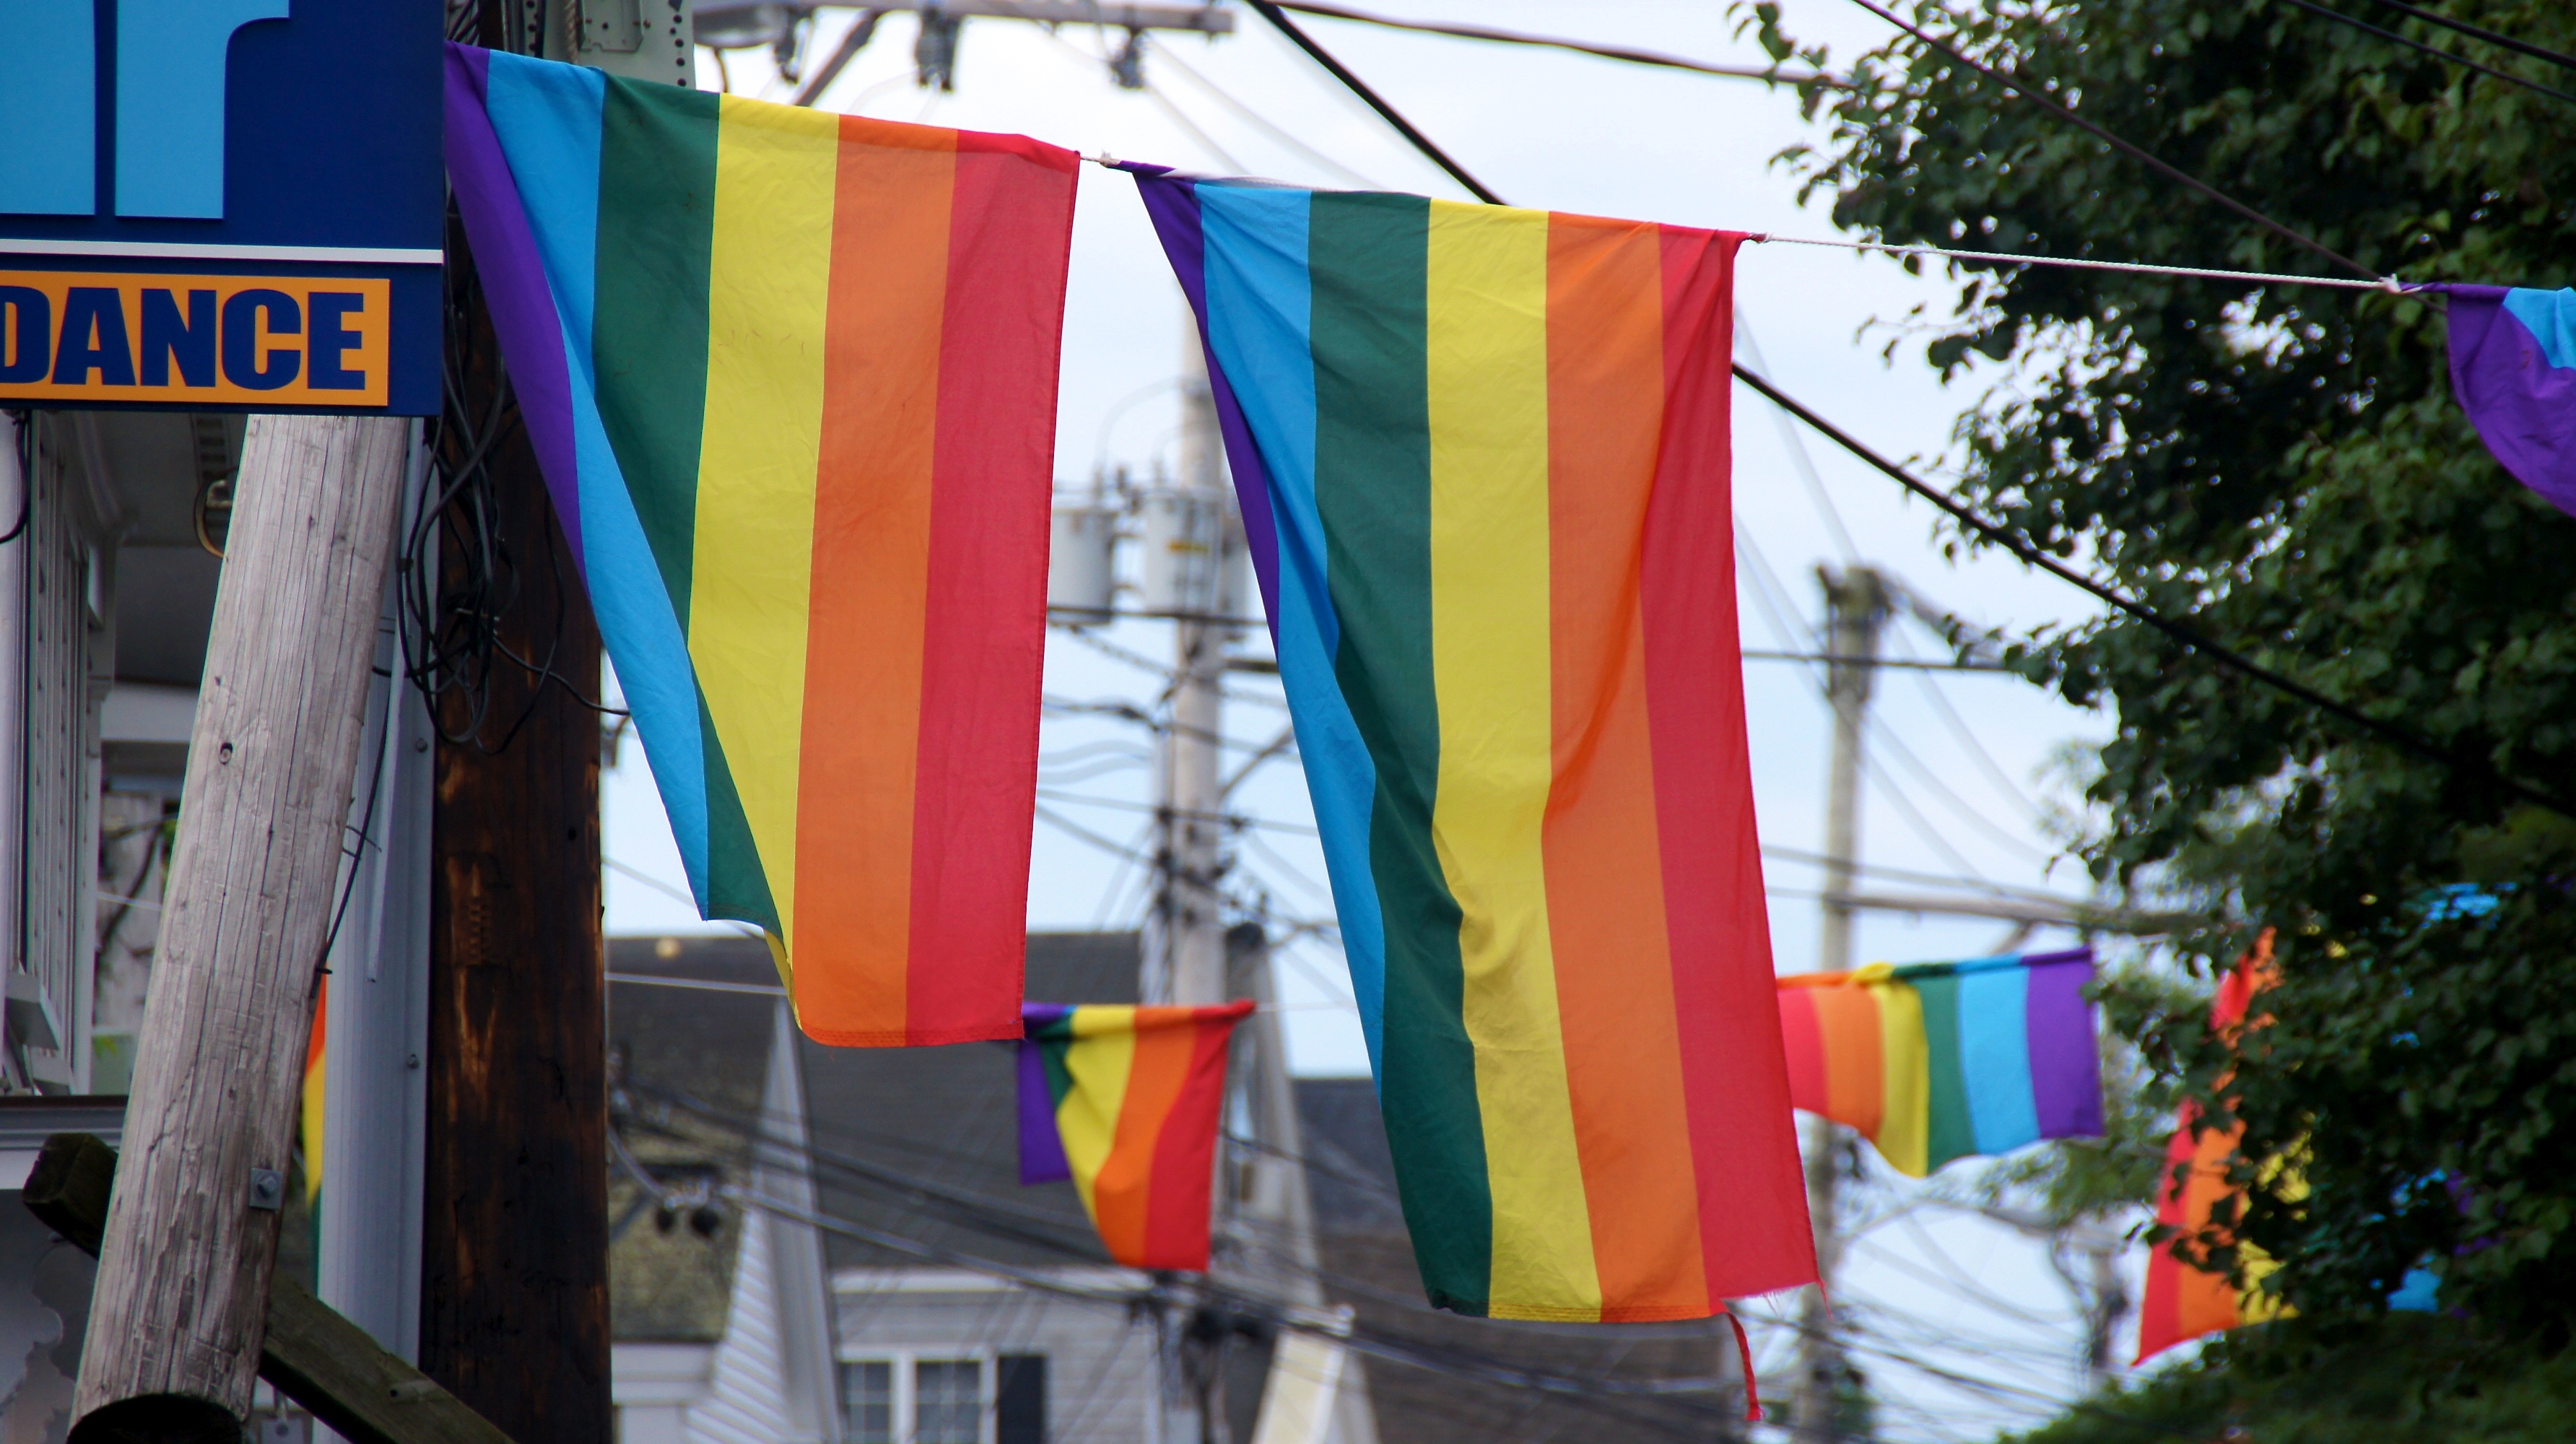 Provincetown, MA. Photo by Ted Eytan, Flickr